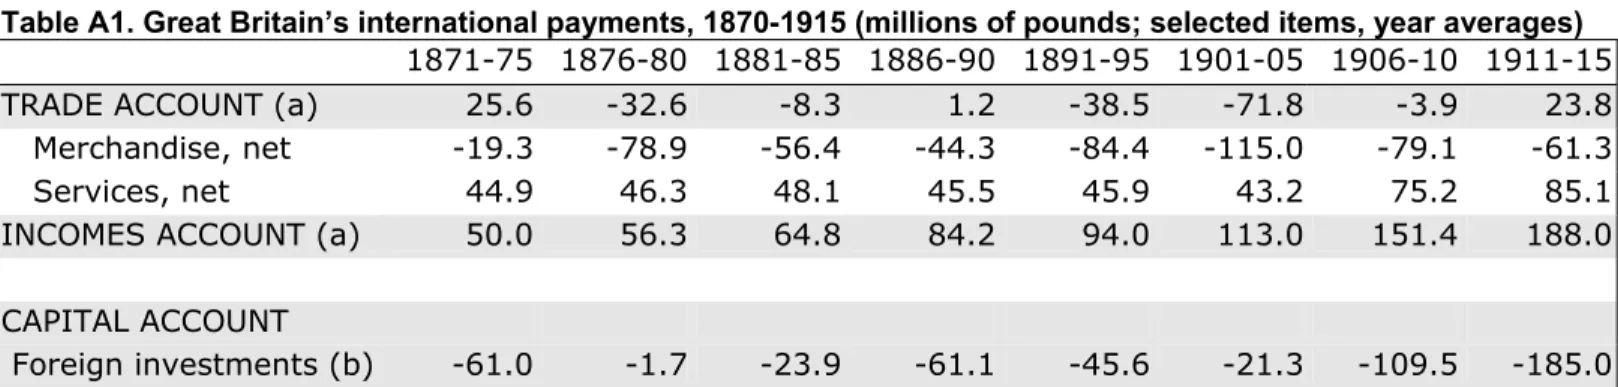 Table A1. Great Britain’s international payments, 1870-1915 (millions of pounds; selected items, year averages) 